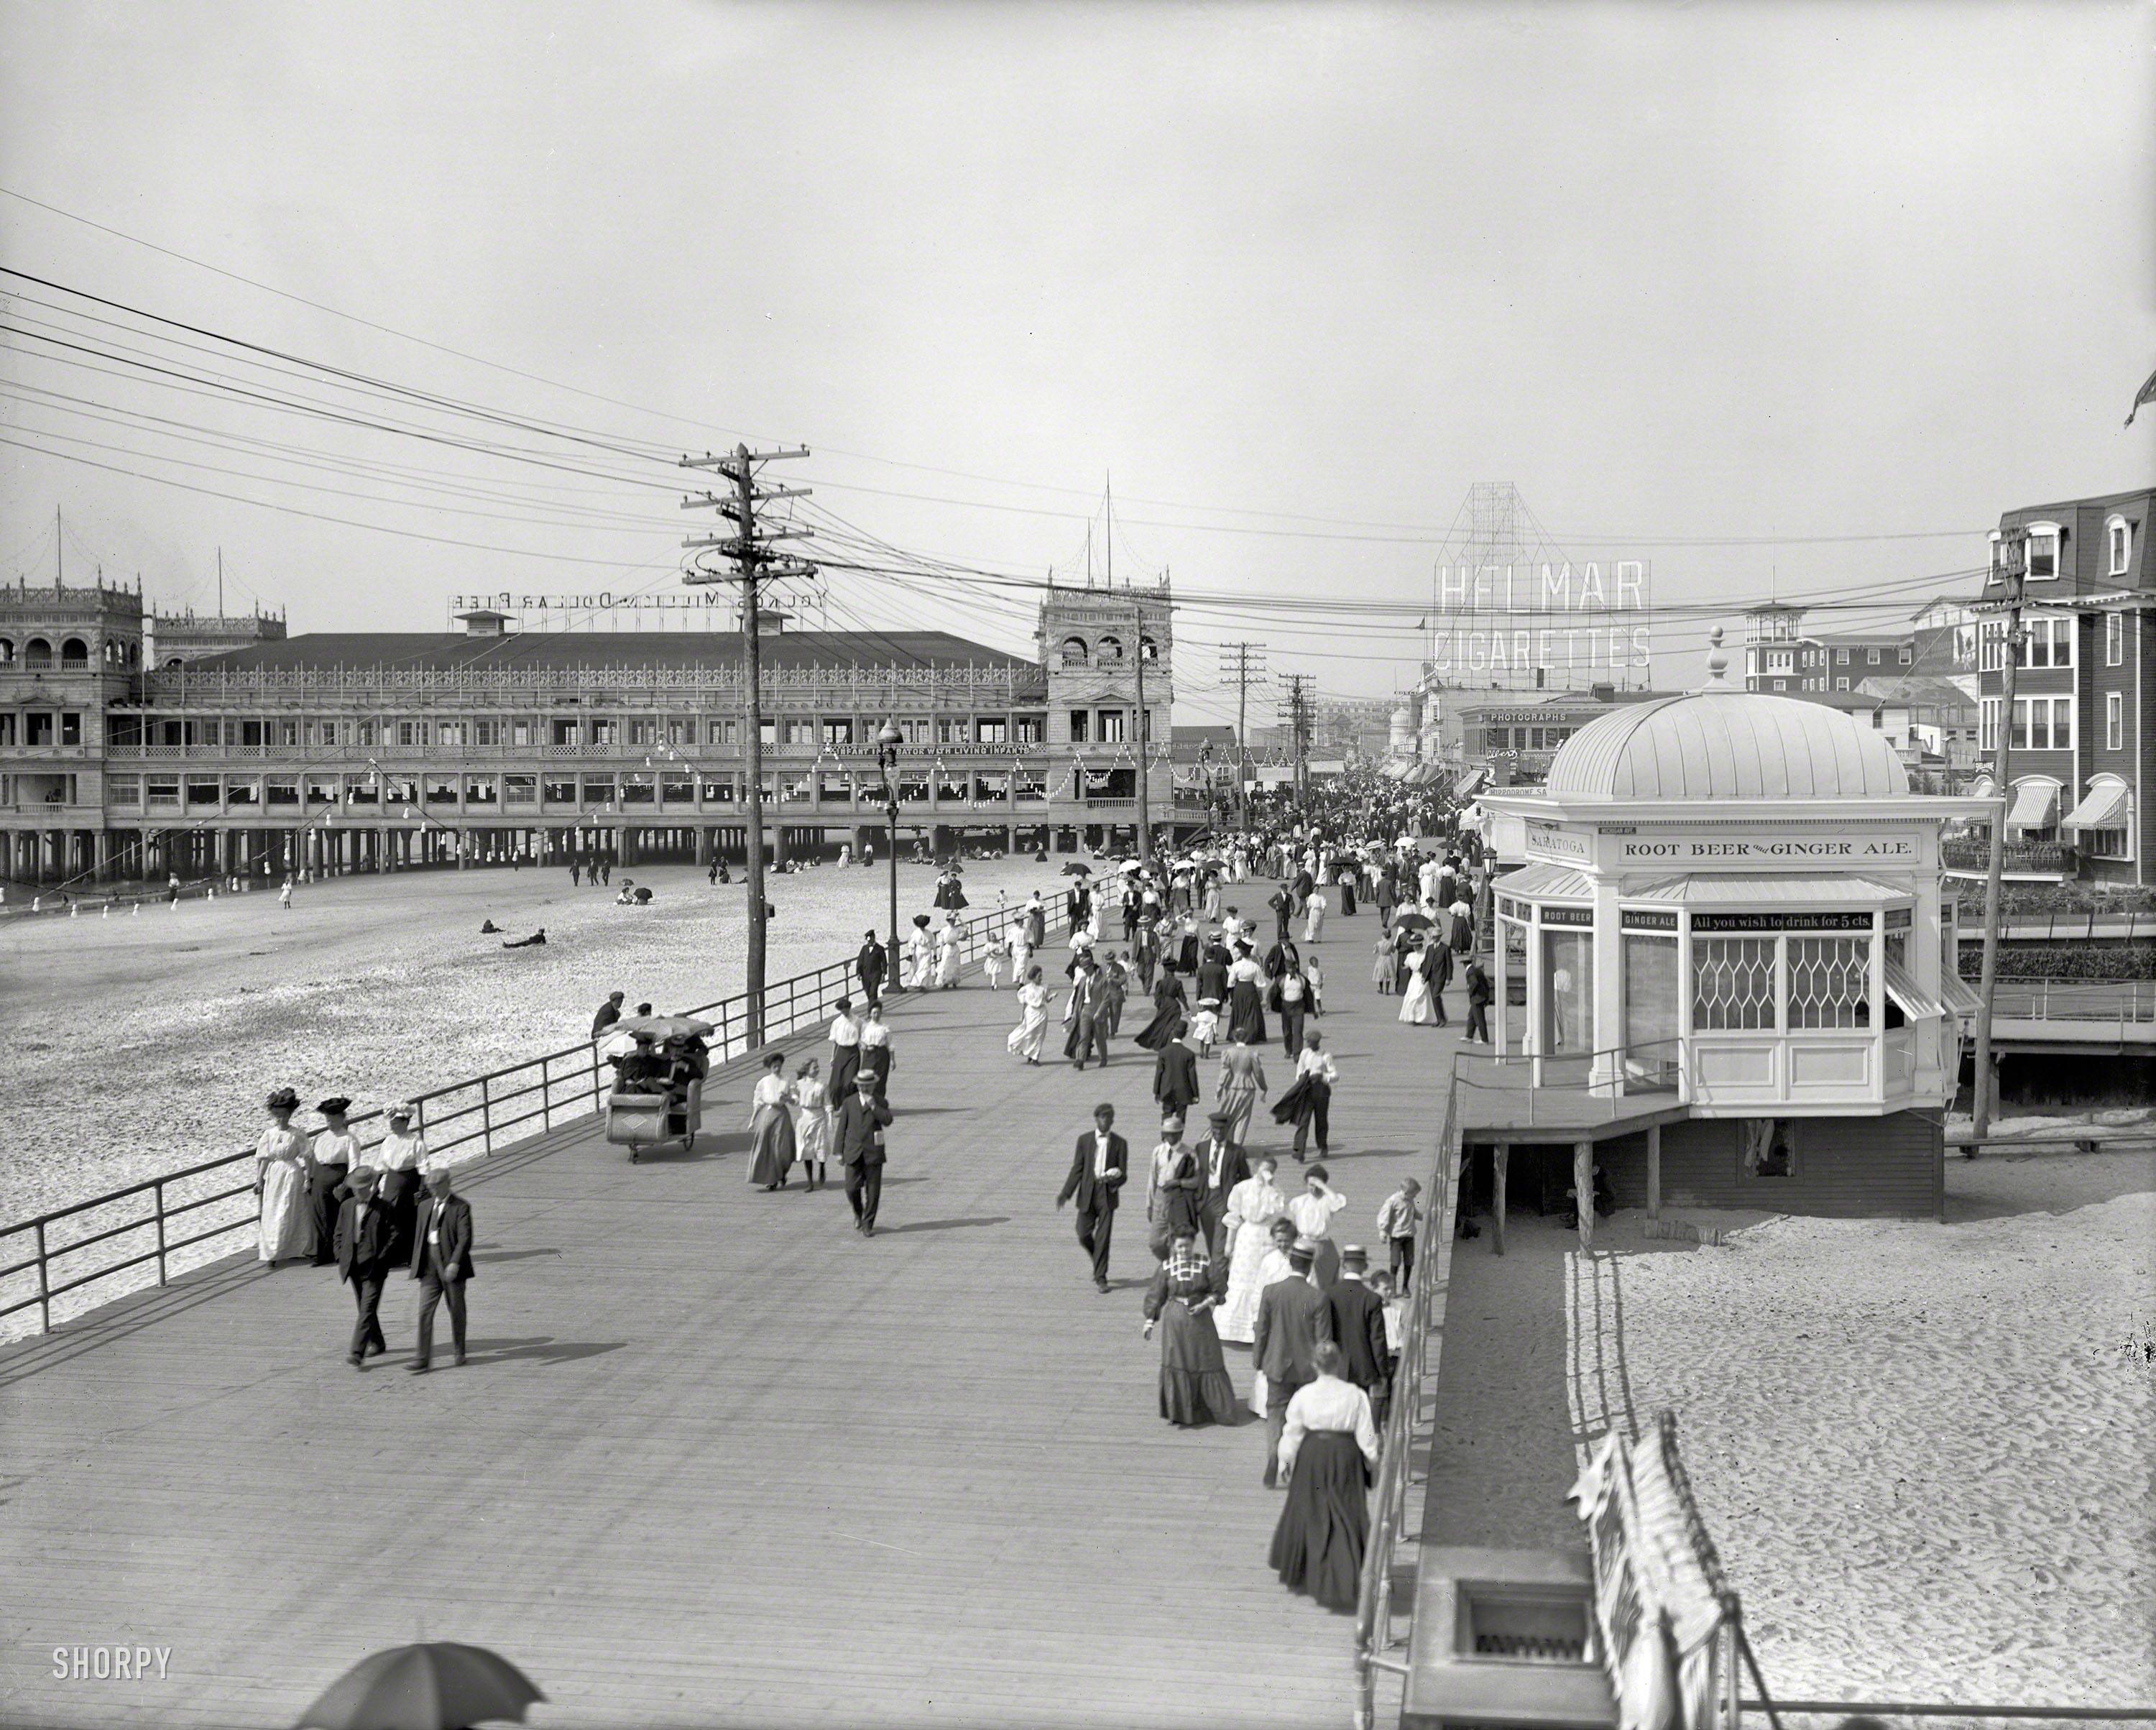 The Jersey Shore circa 1908. "On the Boardwalk, Atlantic City." Advertising signage competes for our attention in this view -- Saratoga Root Beer & Ginger Ale ("All you wish to drink for 5 cts") vying with Helmar Cigarettes and Young's Million-Dollar Pier ("INFANT INCUBATOR WITH LIVING INFANTS"). 8x10 glass negative, Detroit Publishing Company. View full size.